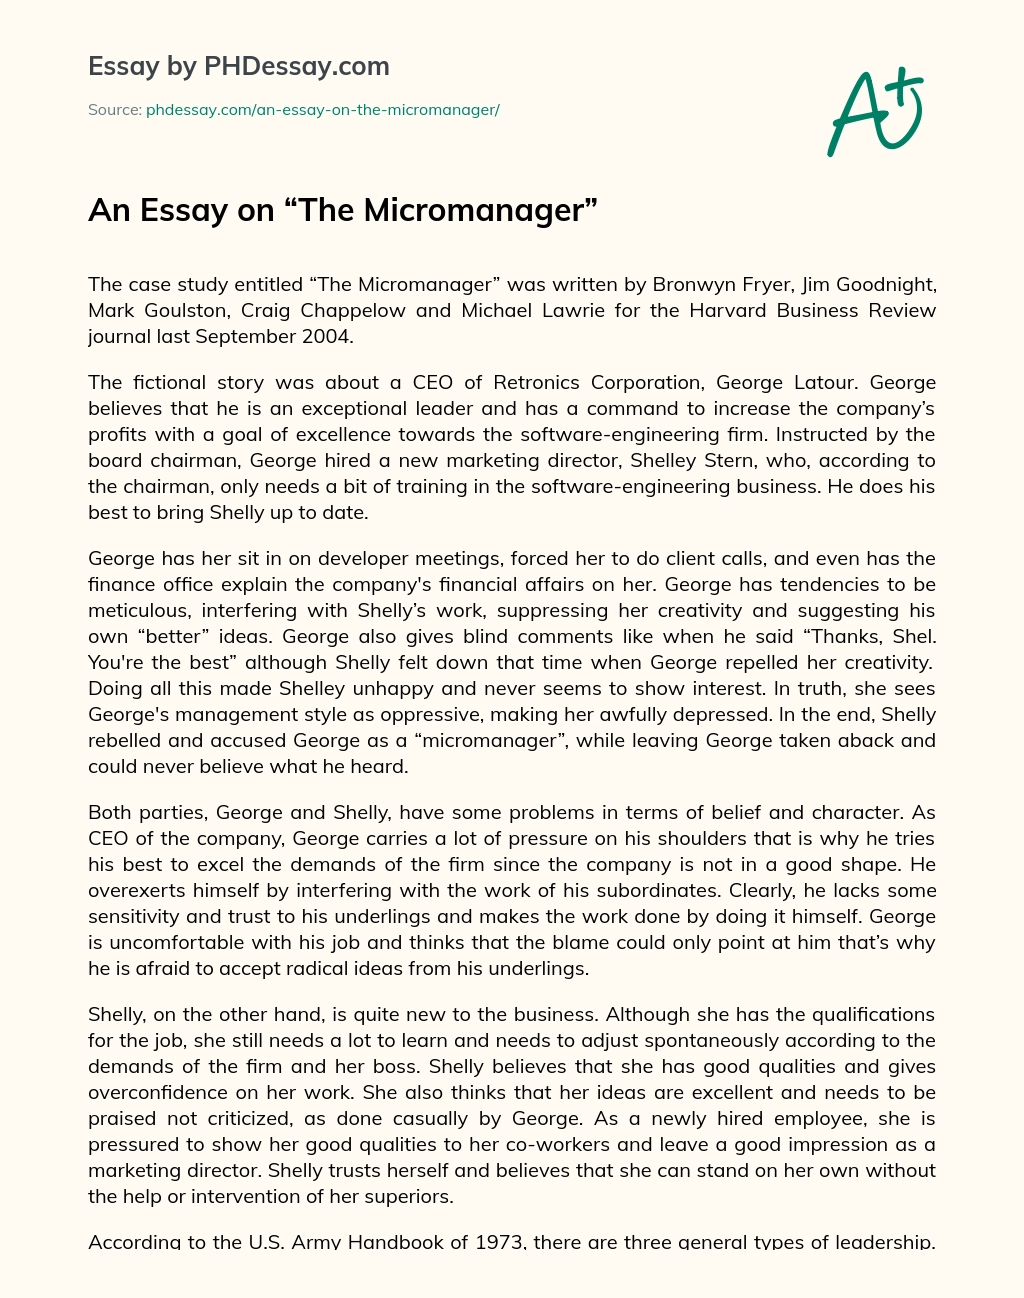 An Essay on “The Micromanager” essay